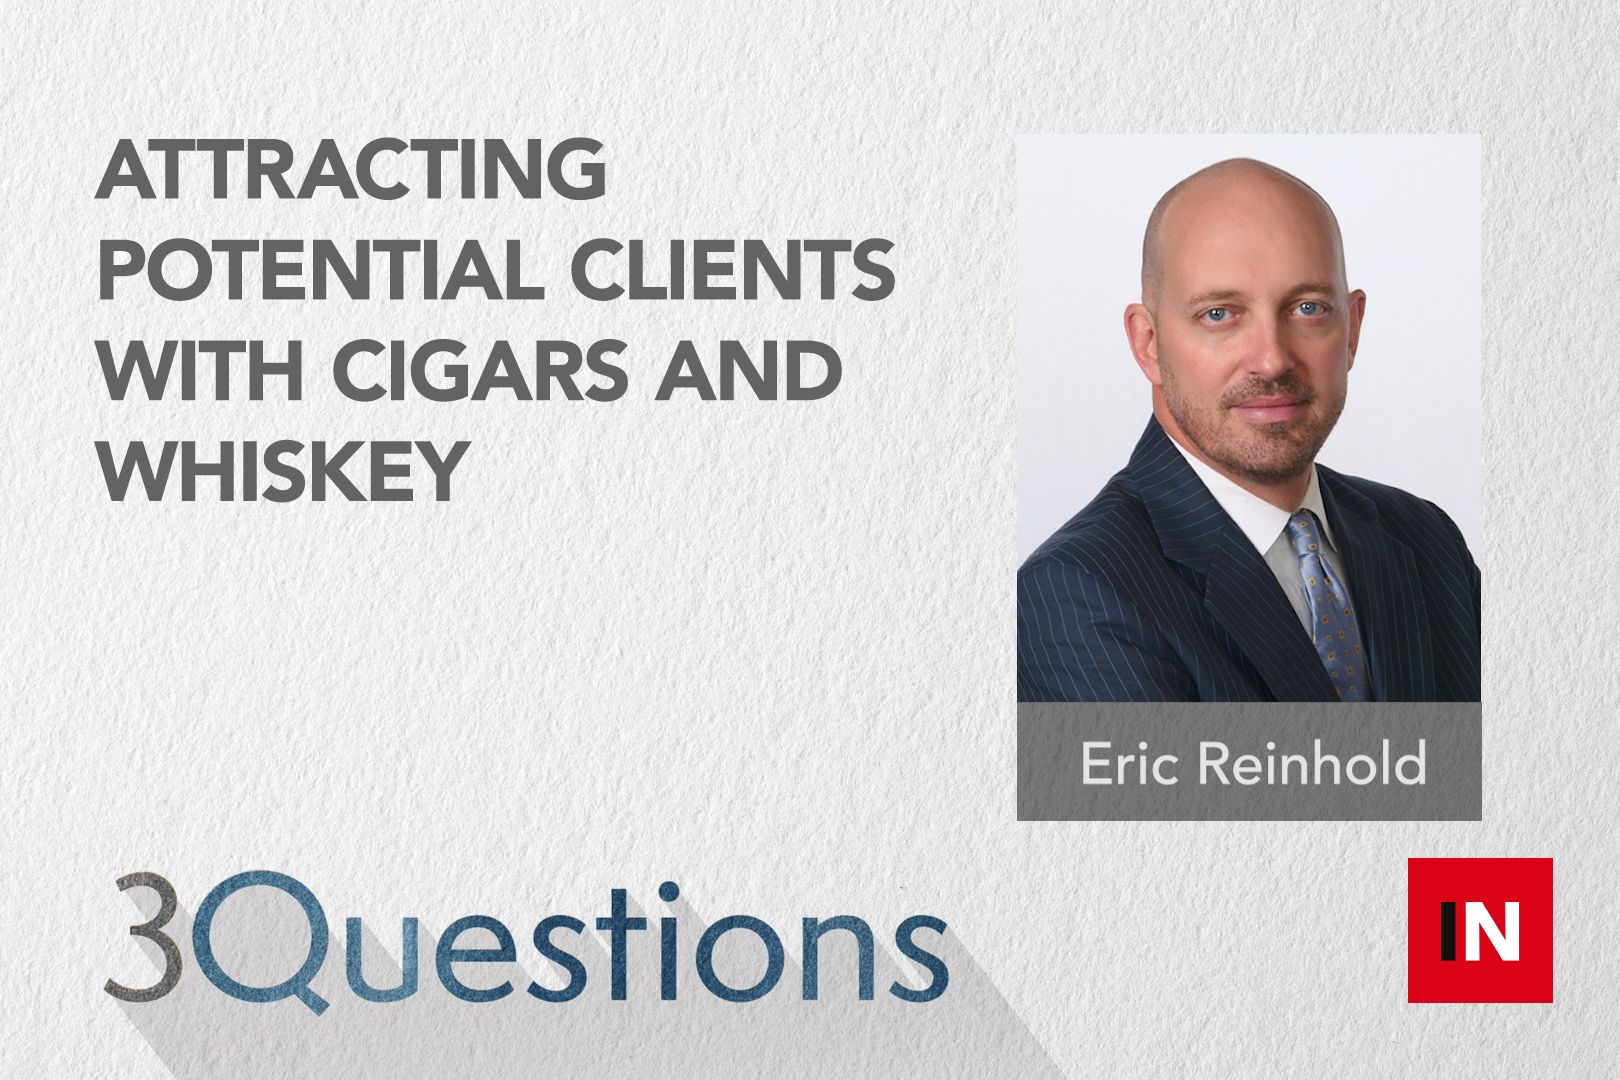 Attracting potential clients with cigars and whiskey